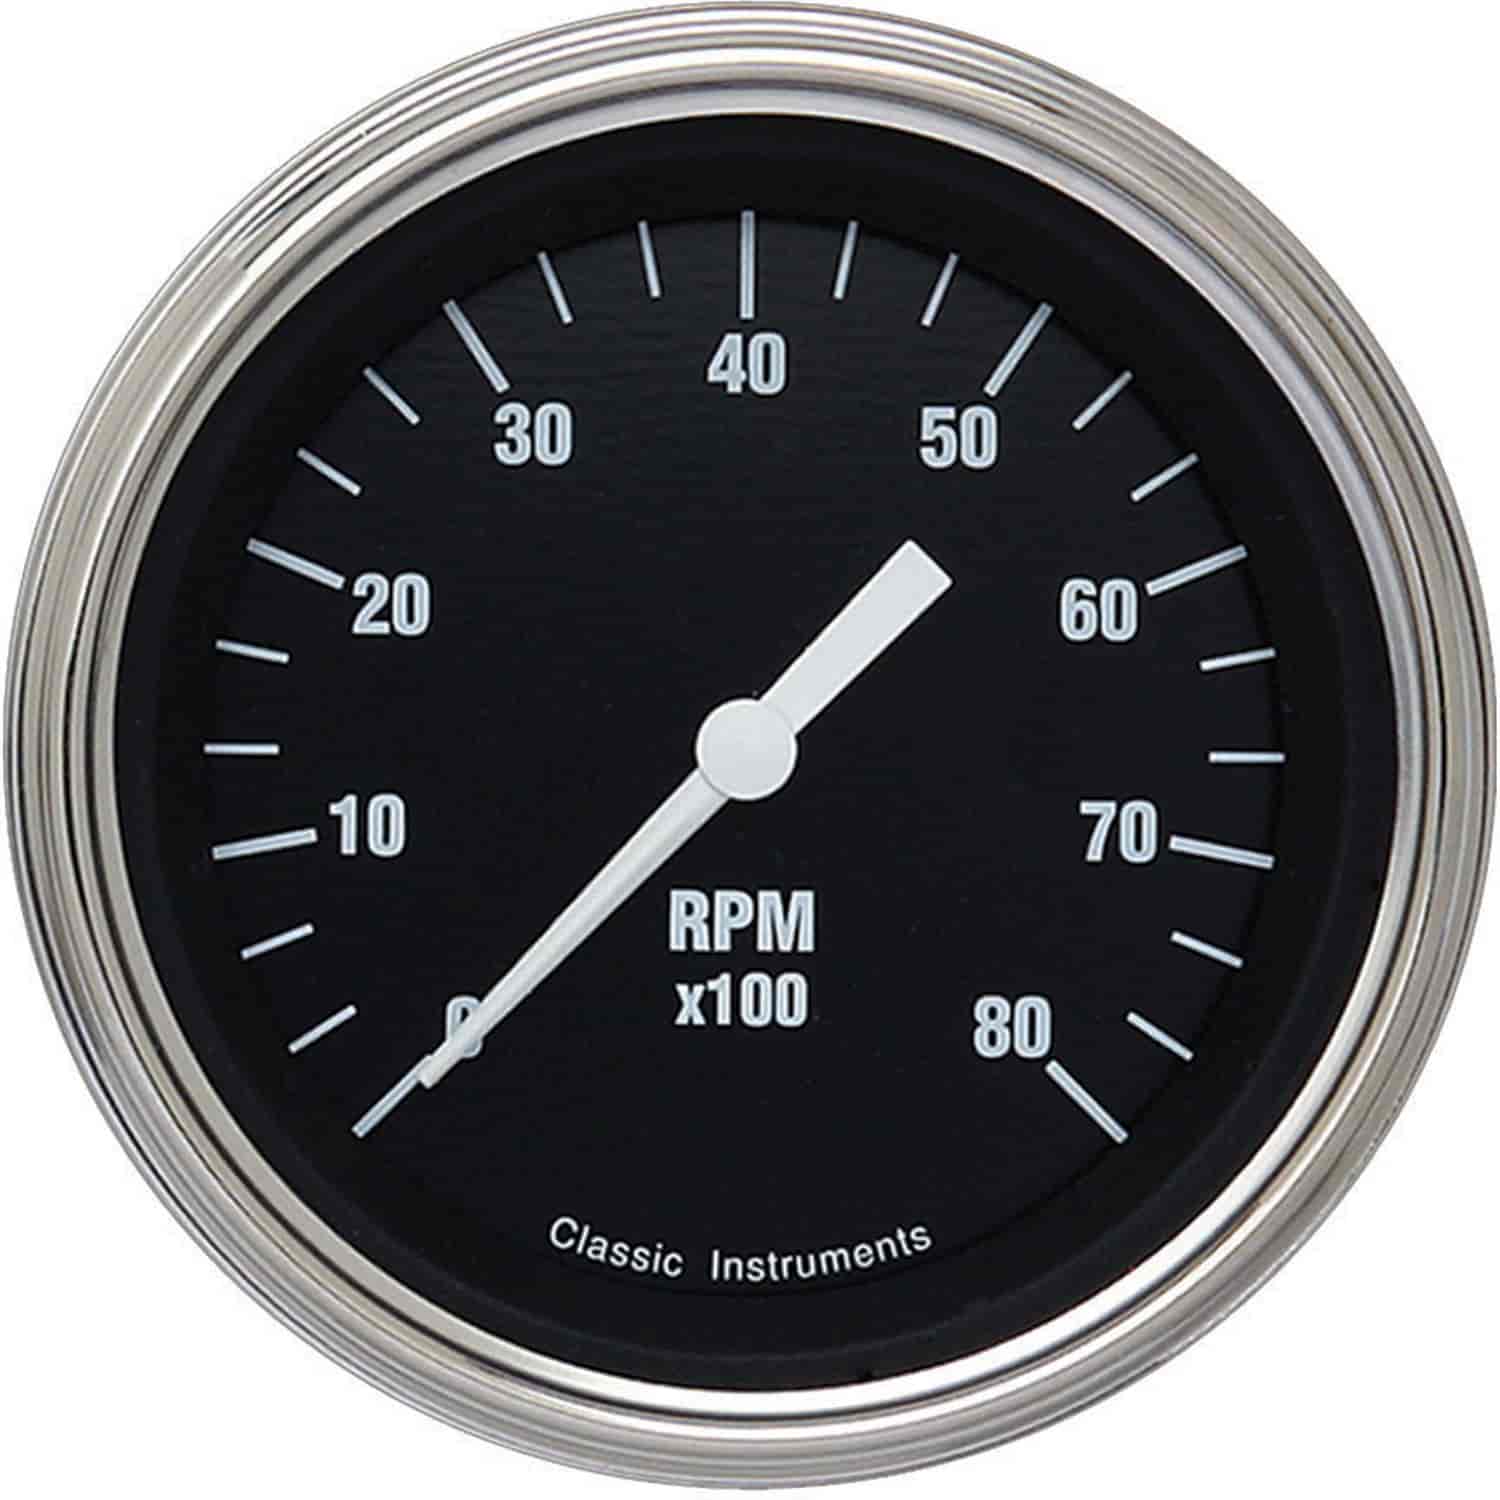 Hot Rod Series Tachometer 3-3/8" Electrical